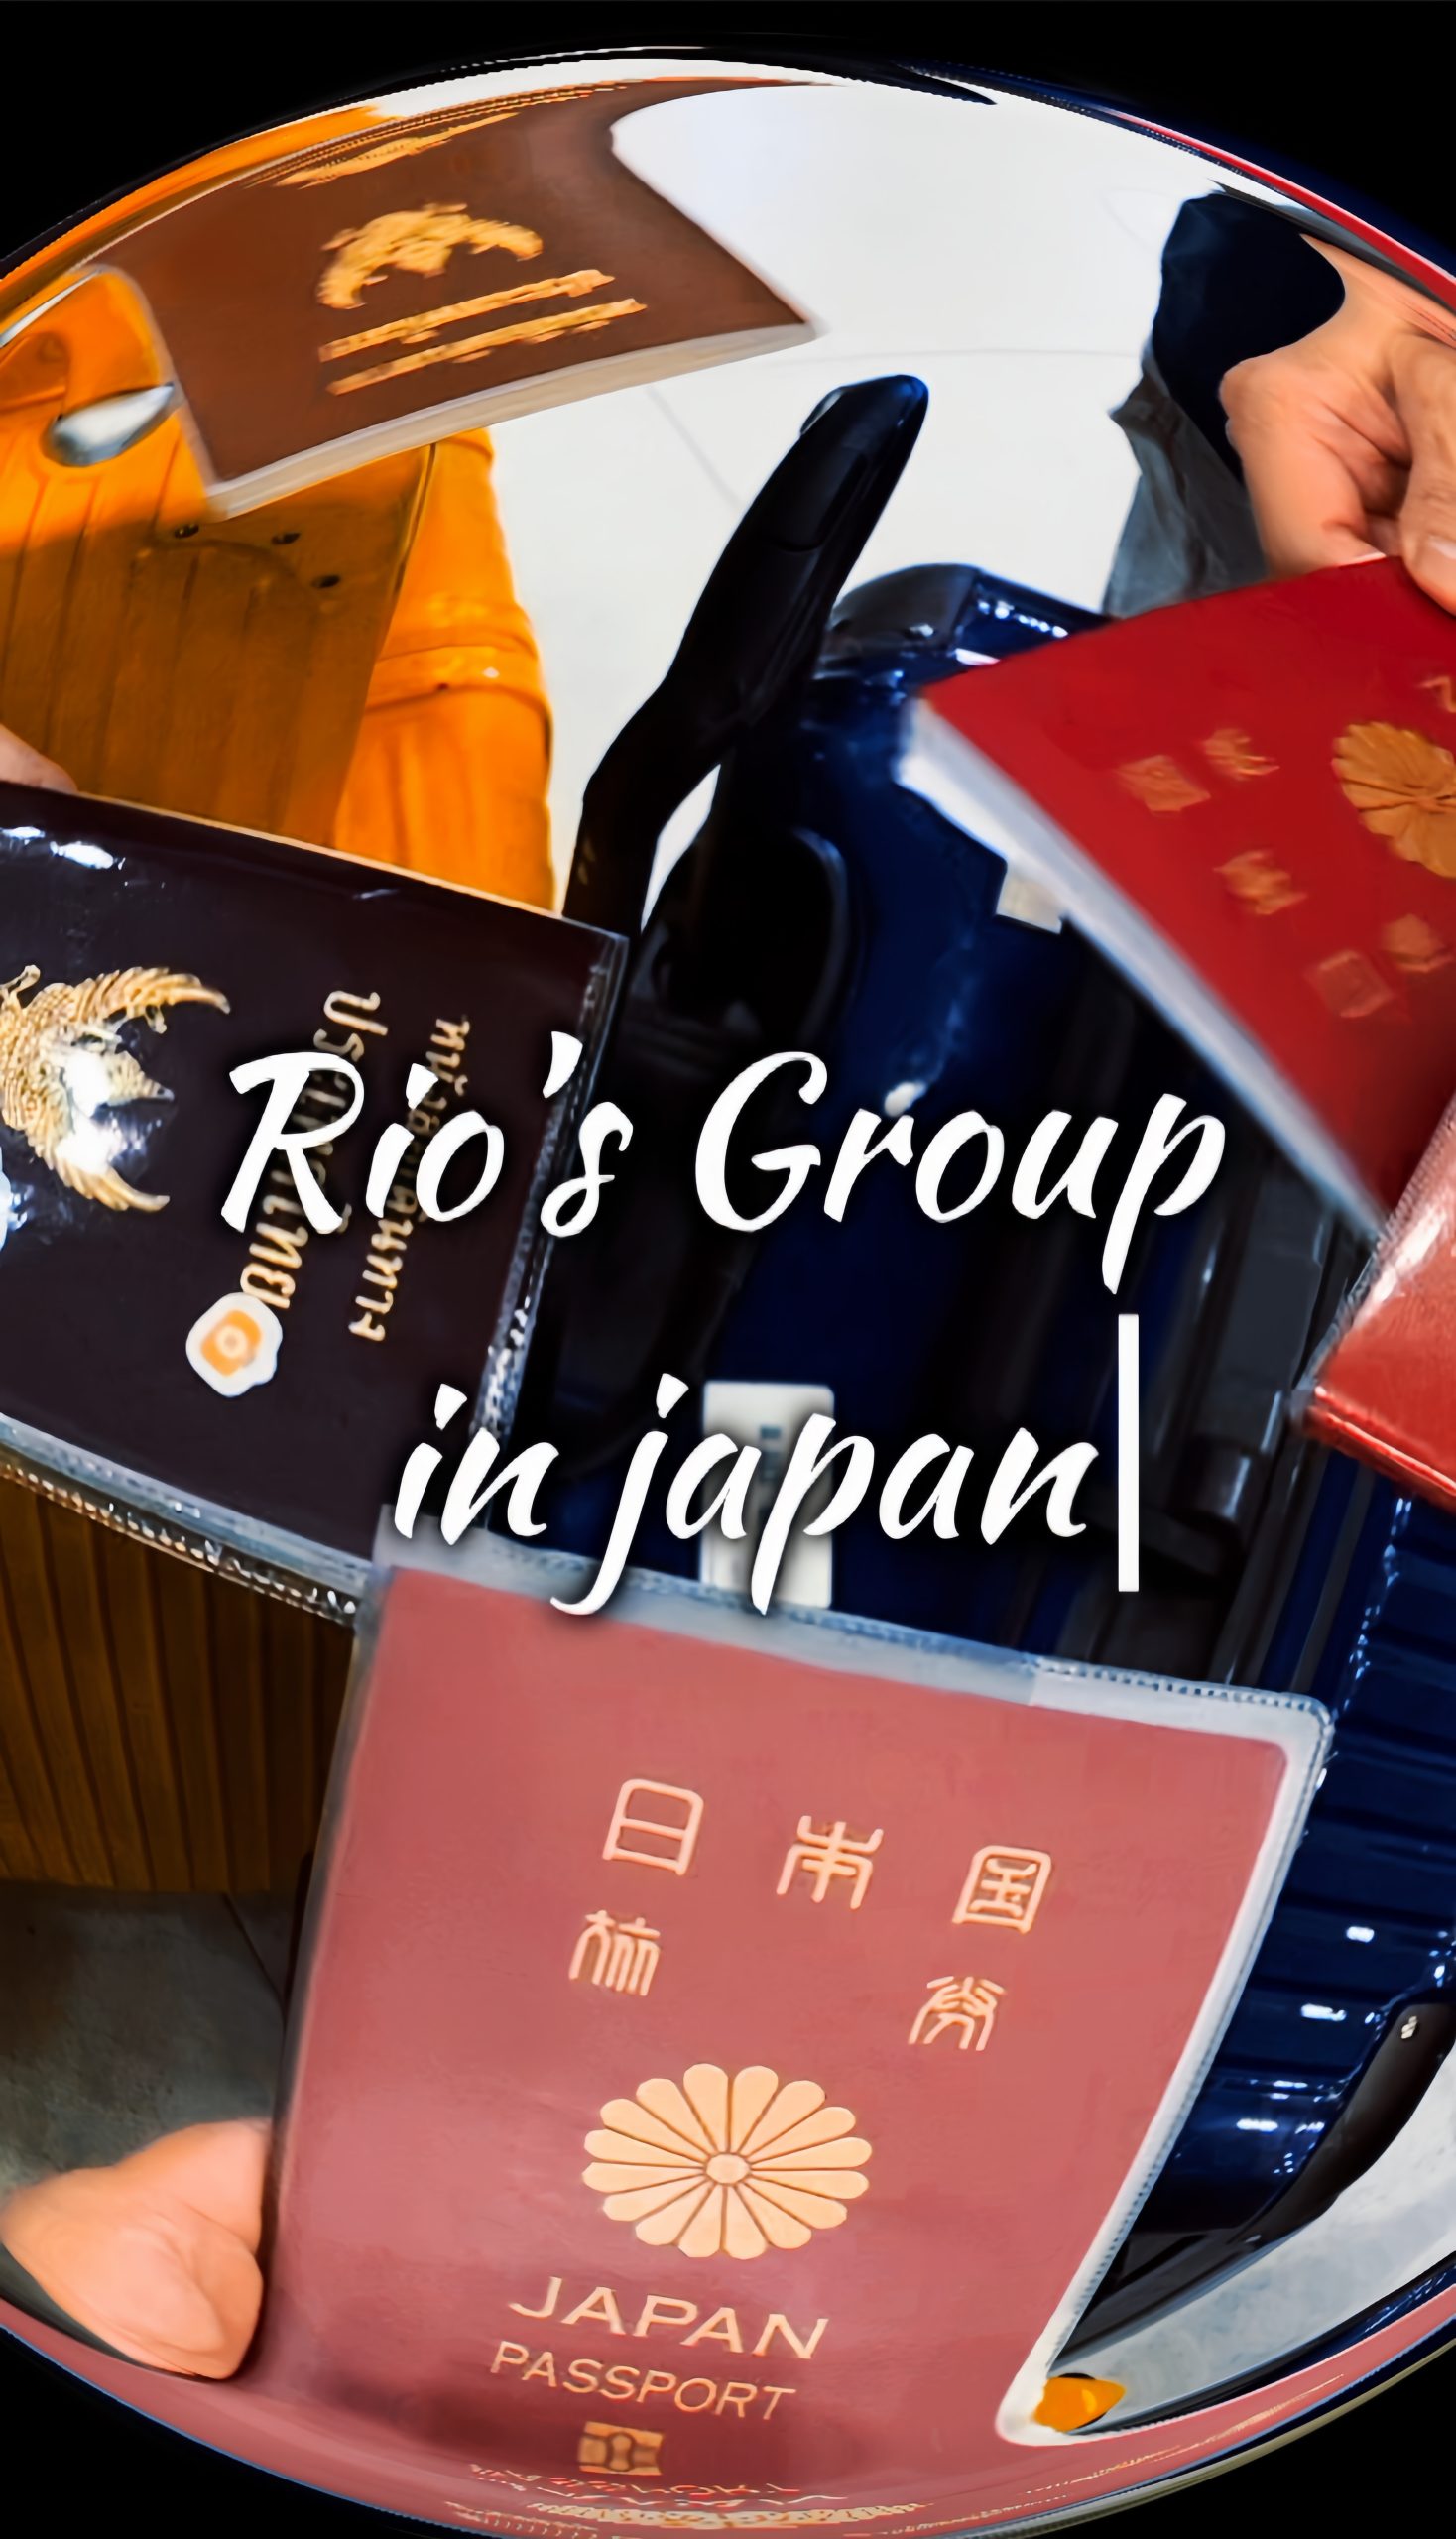 (TH) Rio's group in Japan 🌸✈️ By Rio's group